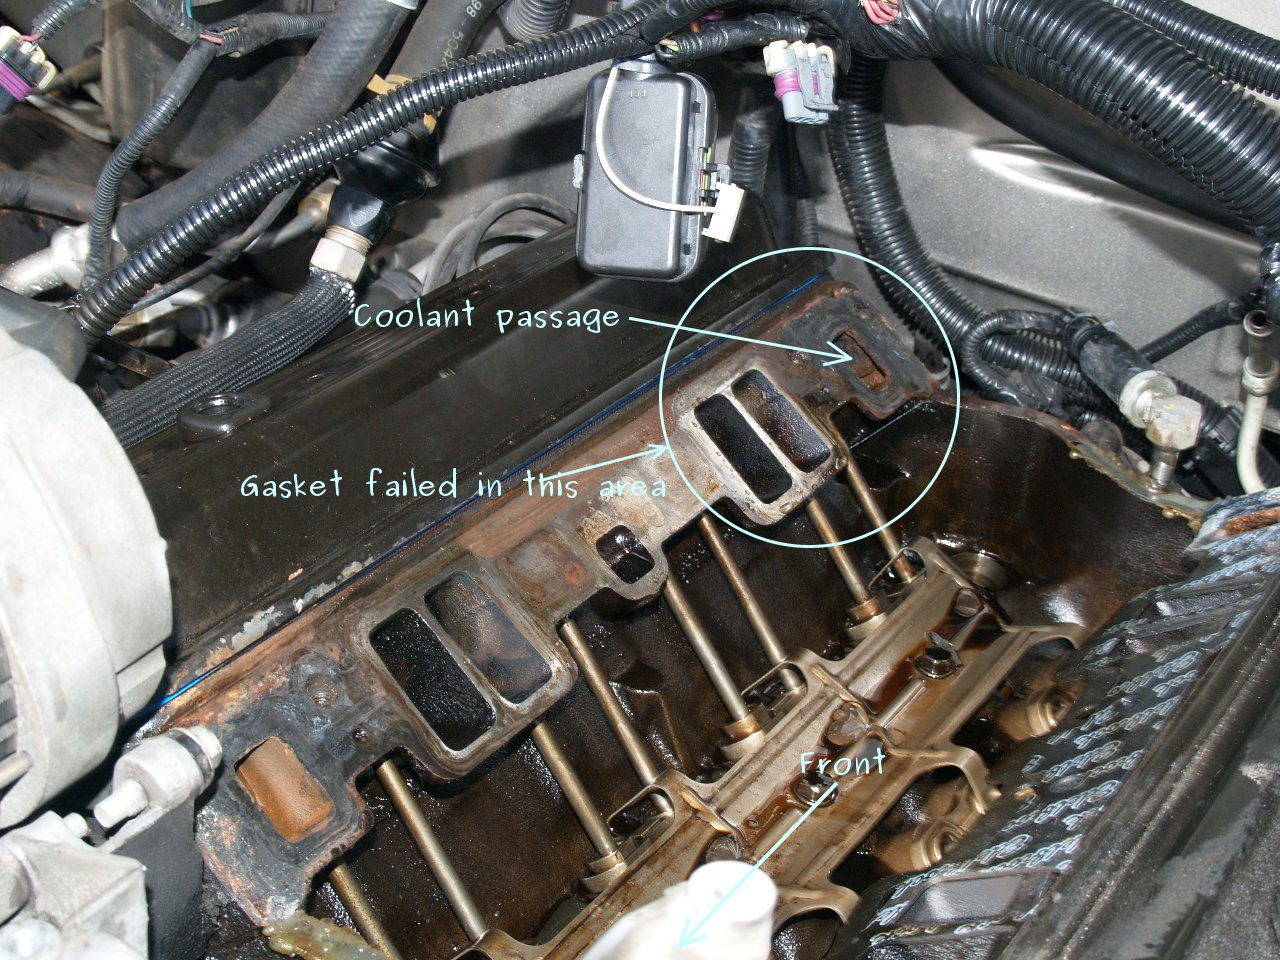 See P0114 in engine